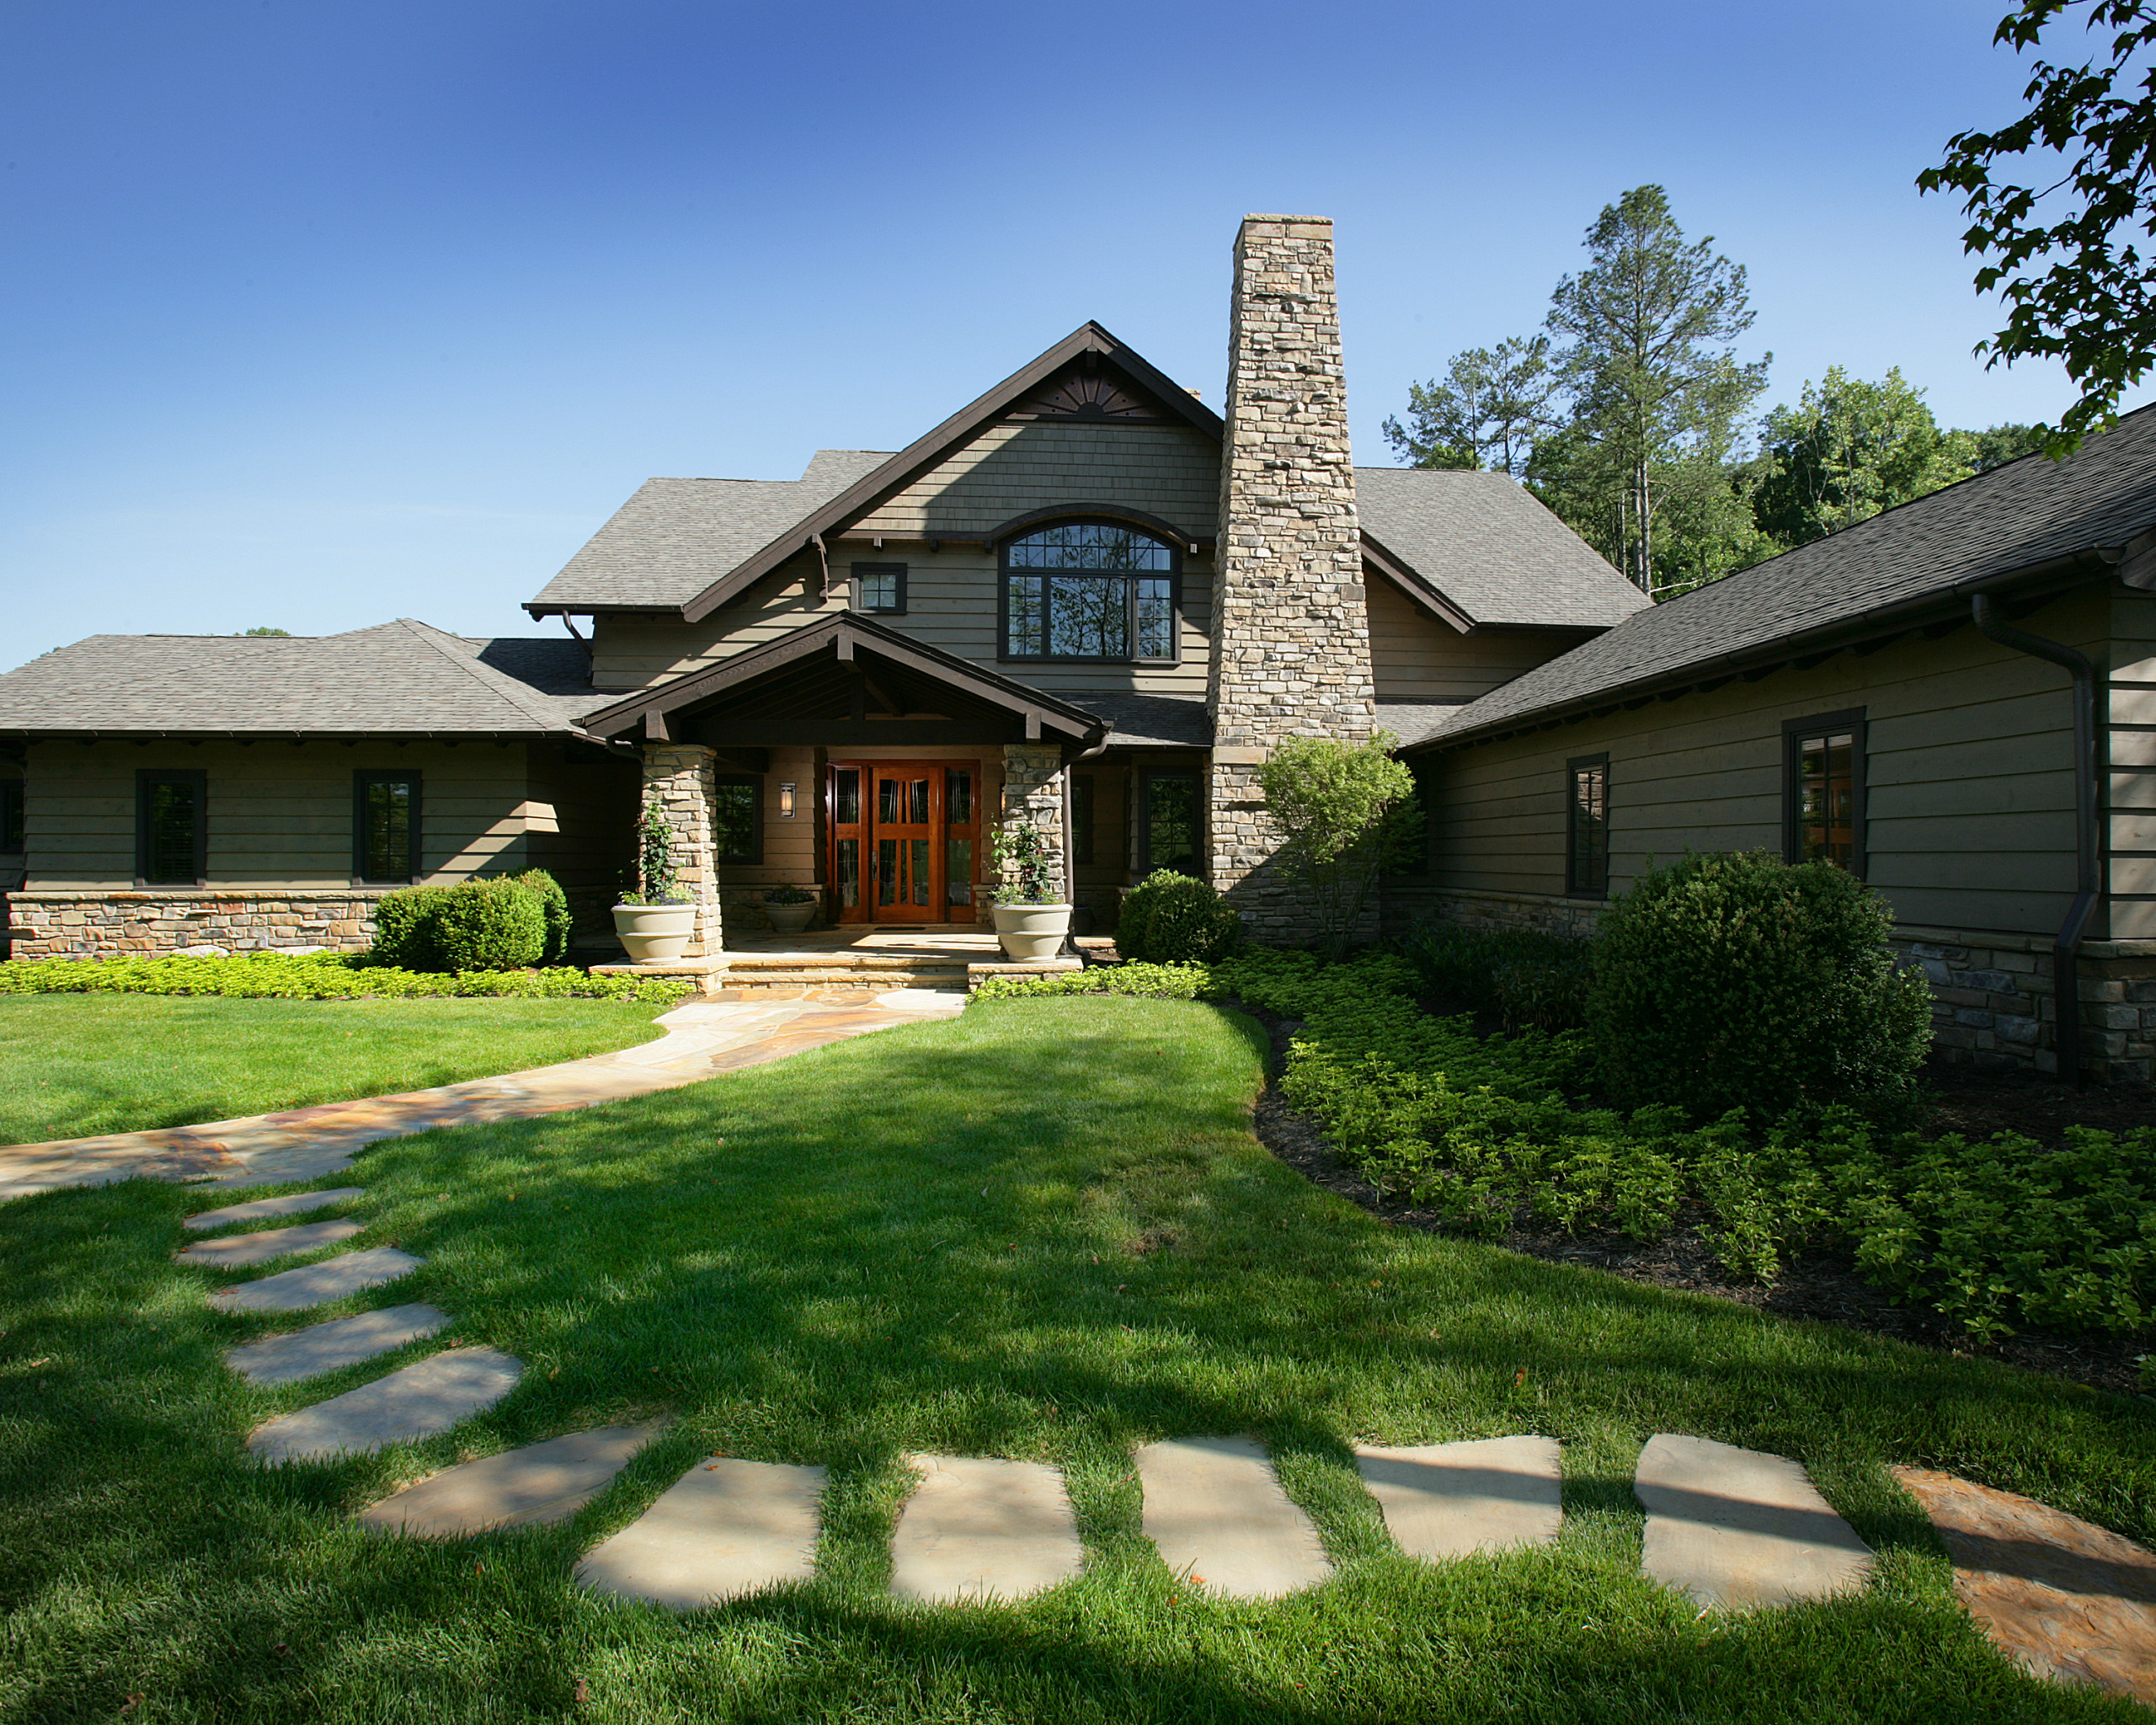 Lake House, Knoxville Custom Home